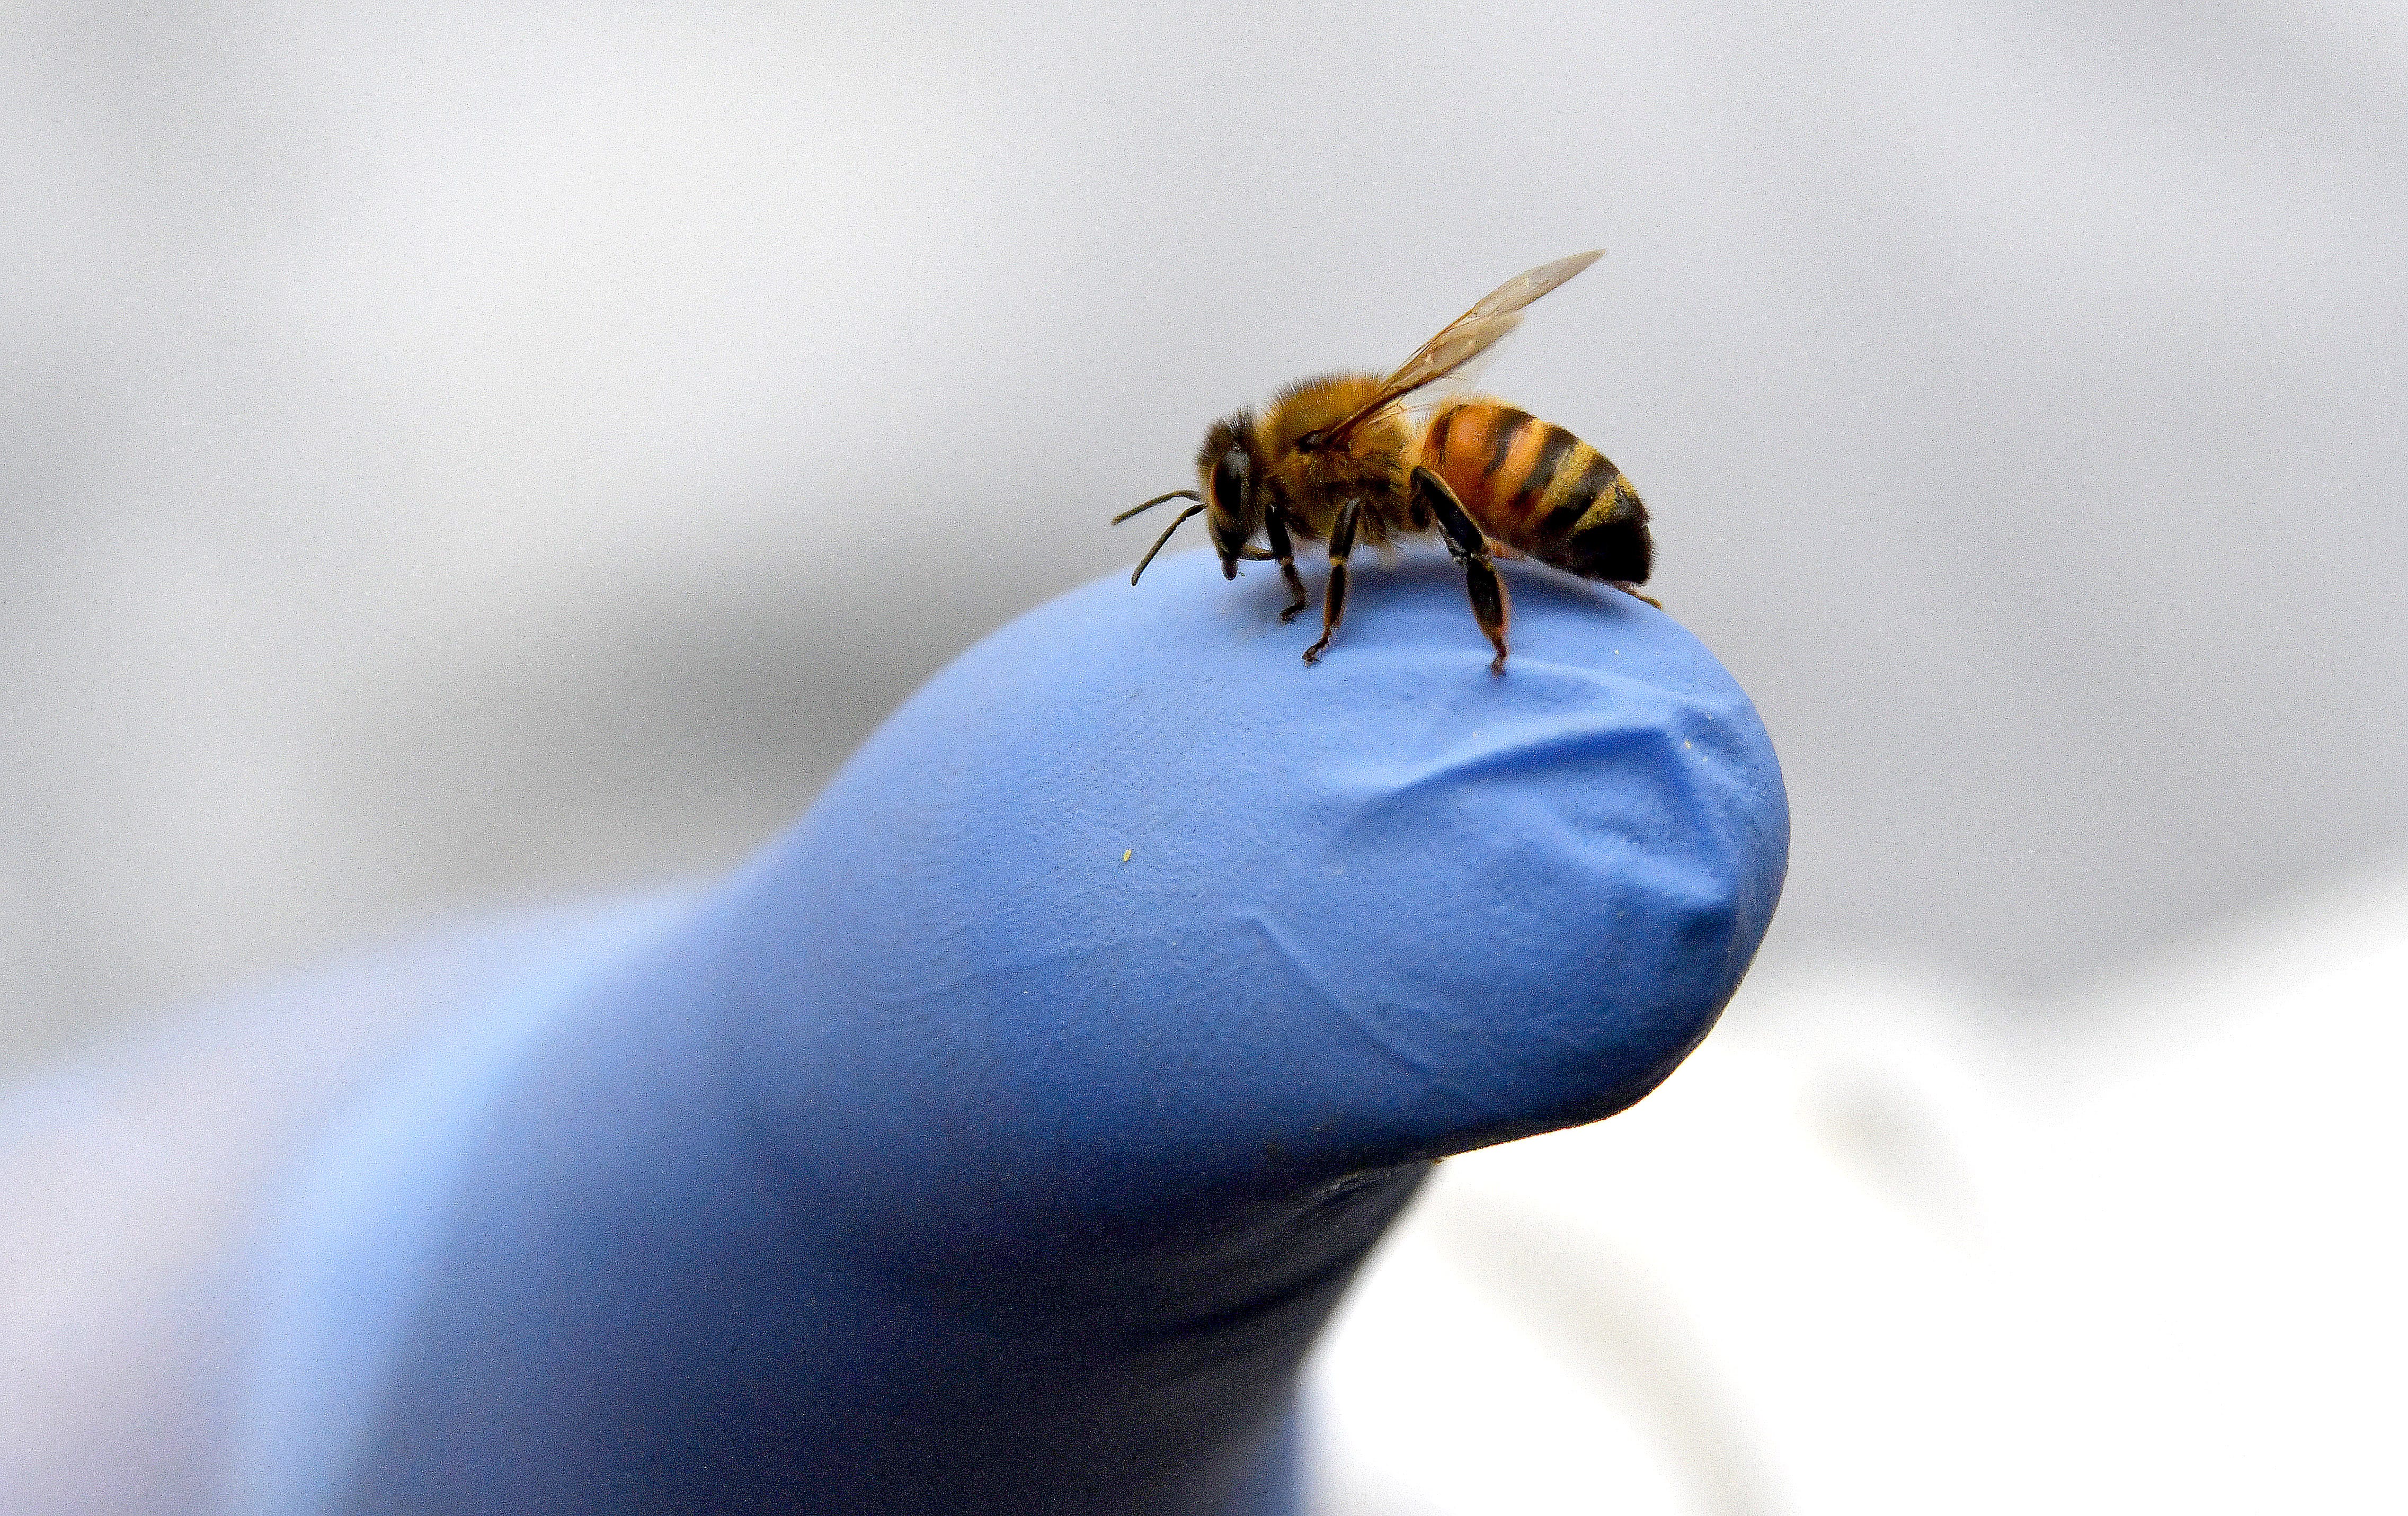 Marine veteran Tom Kusar allows a honey bee to inspect his thumb after it's hive was opened.